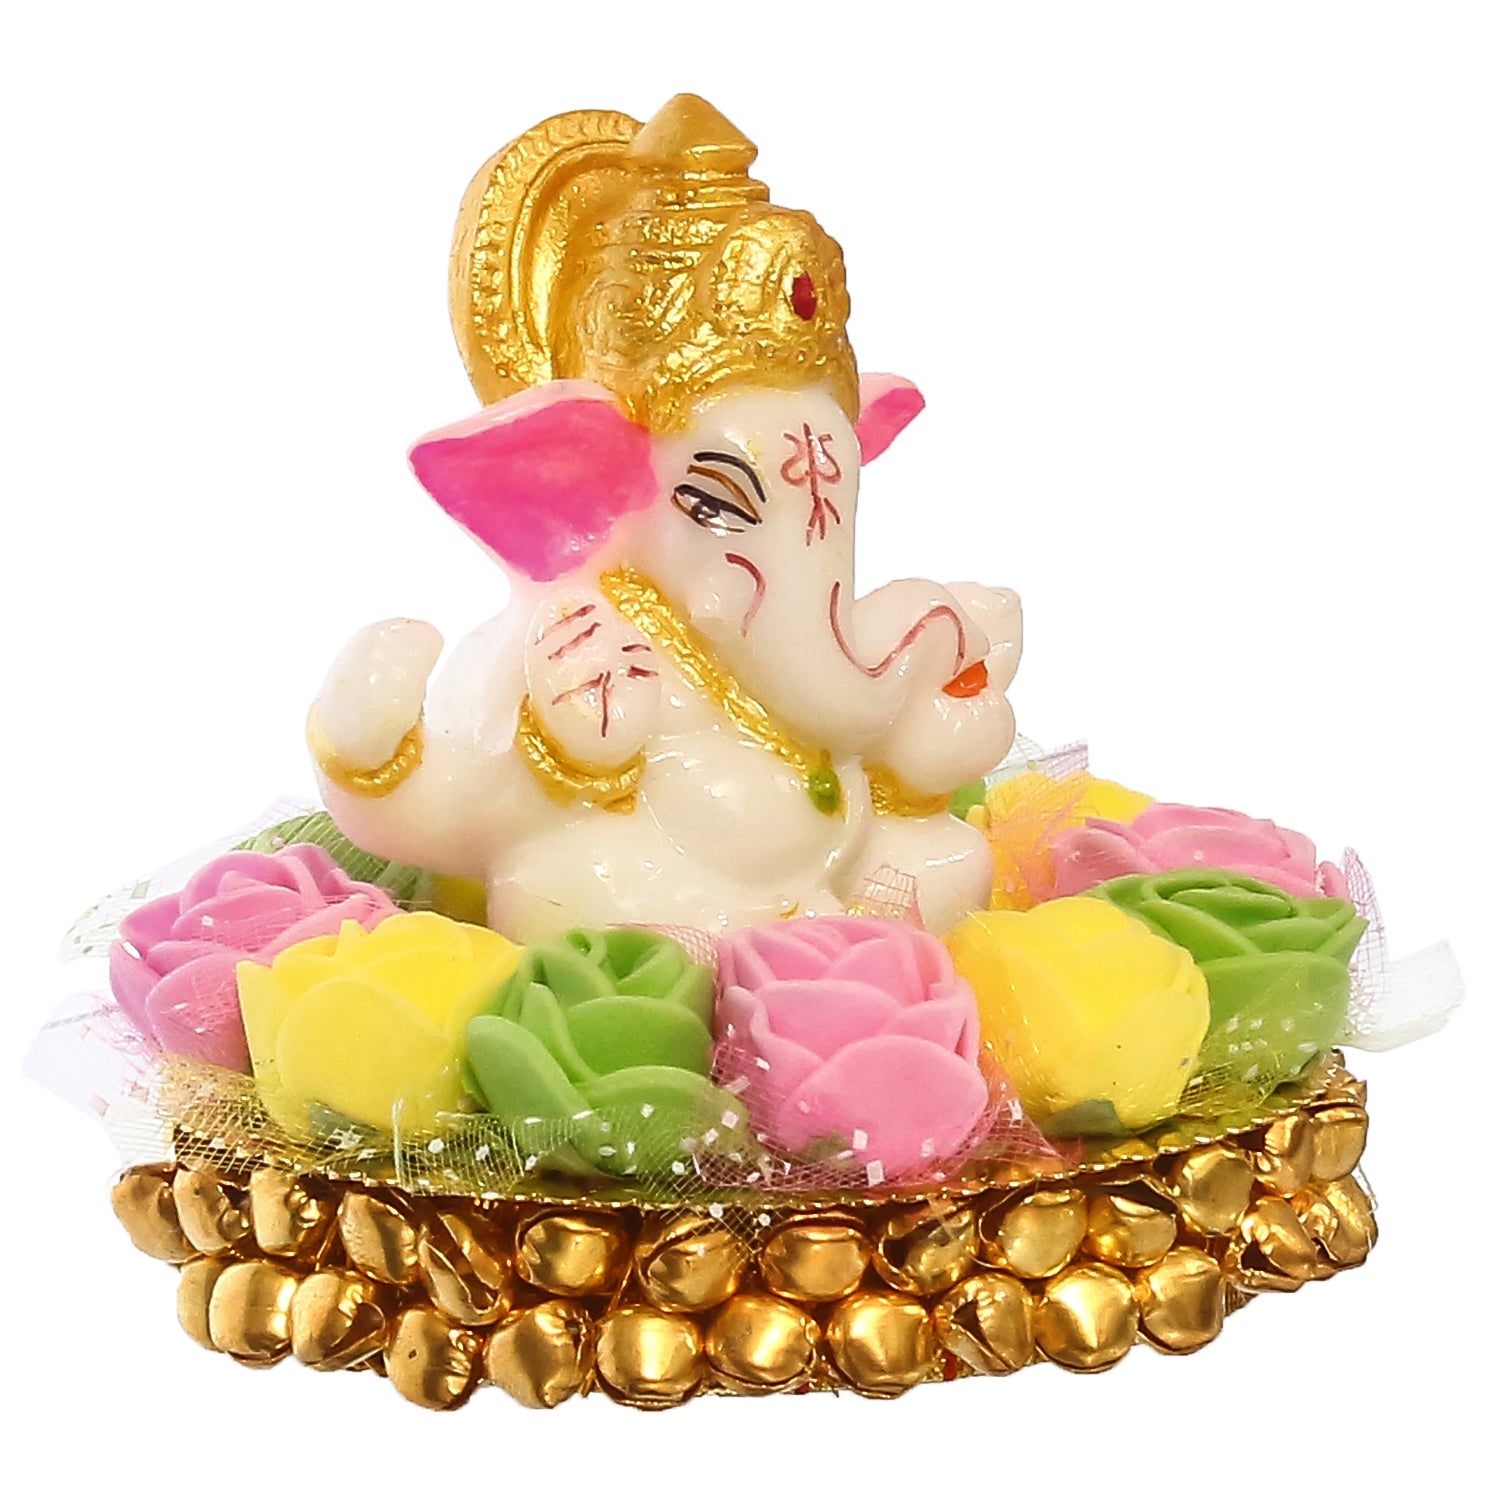 Polyresin Lord Ganesha Idol on Decorative Handcrafted Plate with Colorful Flowers 4